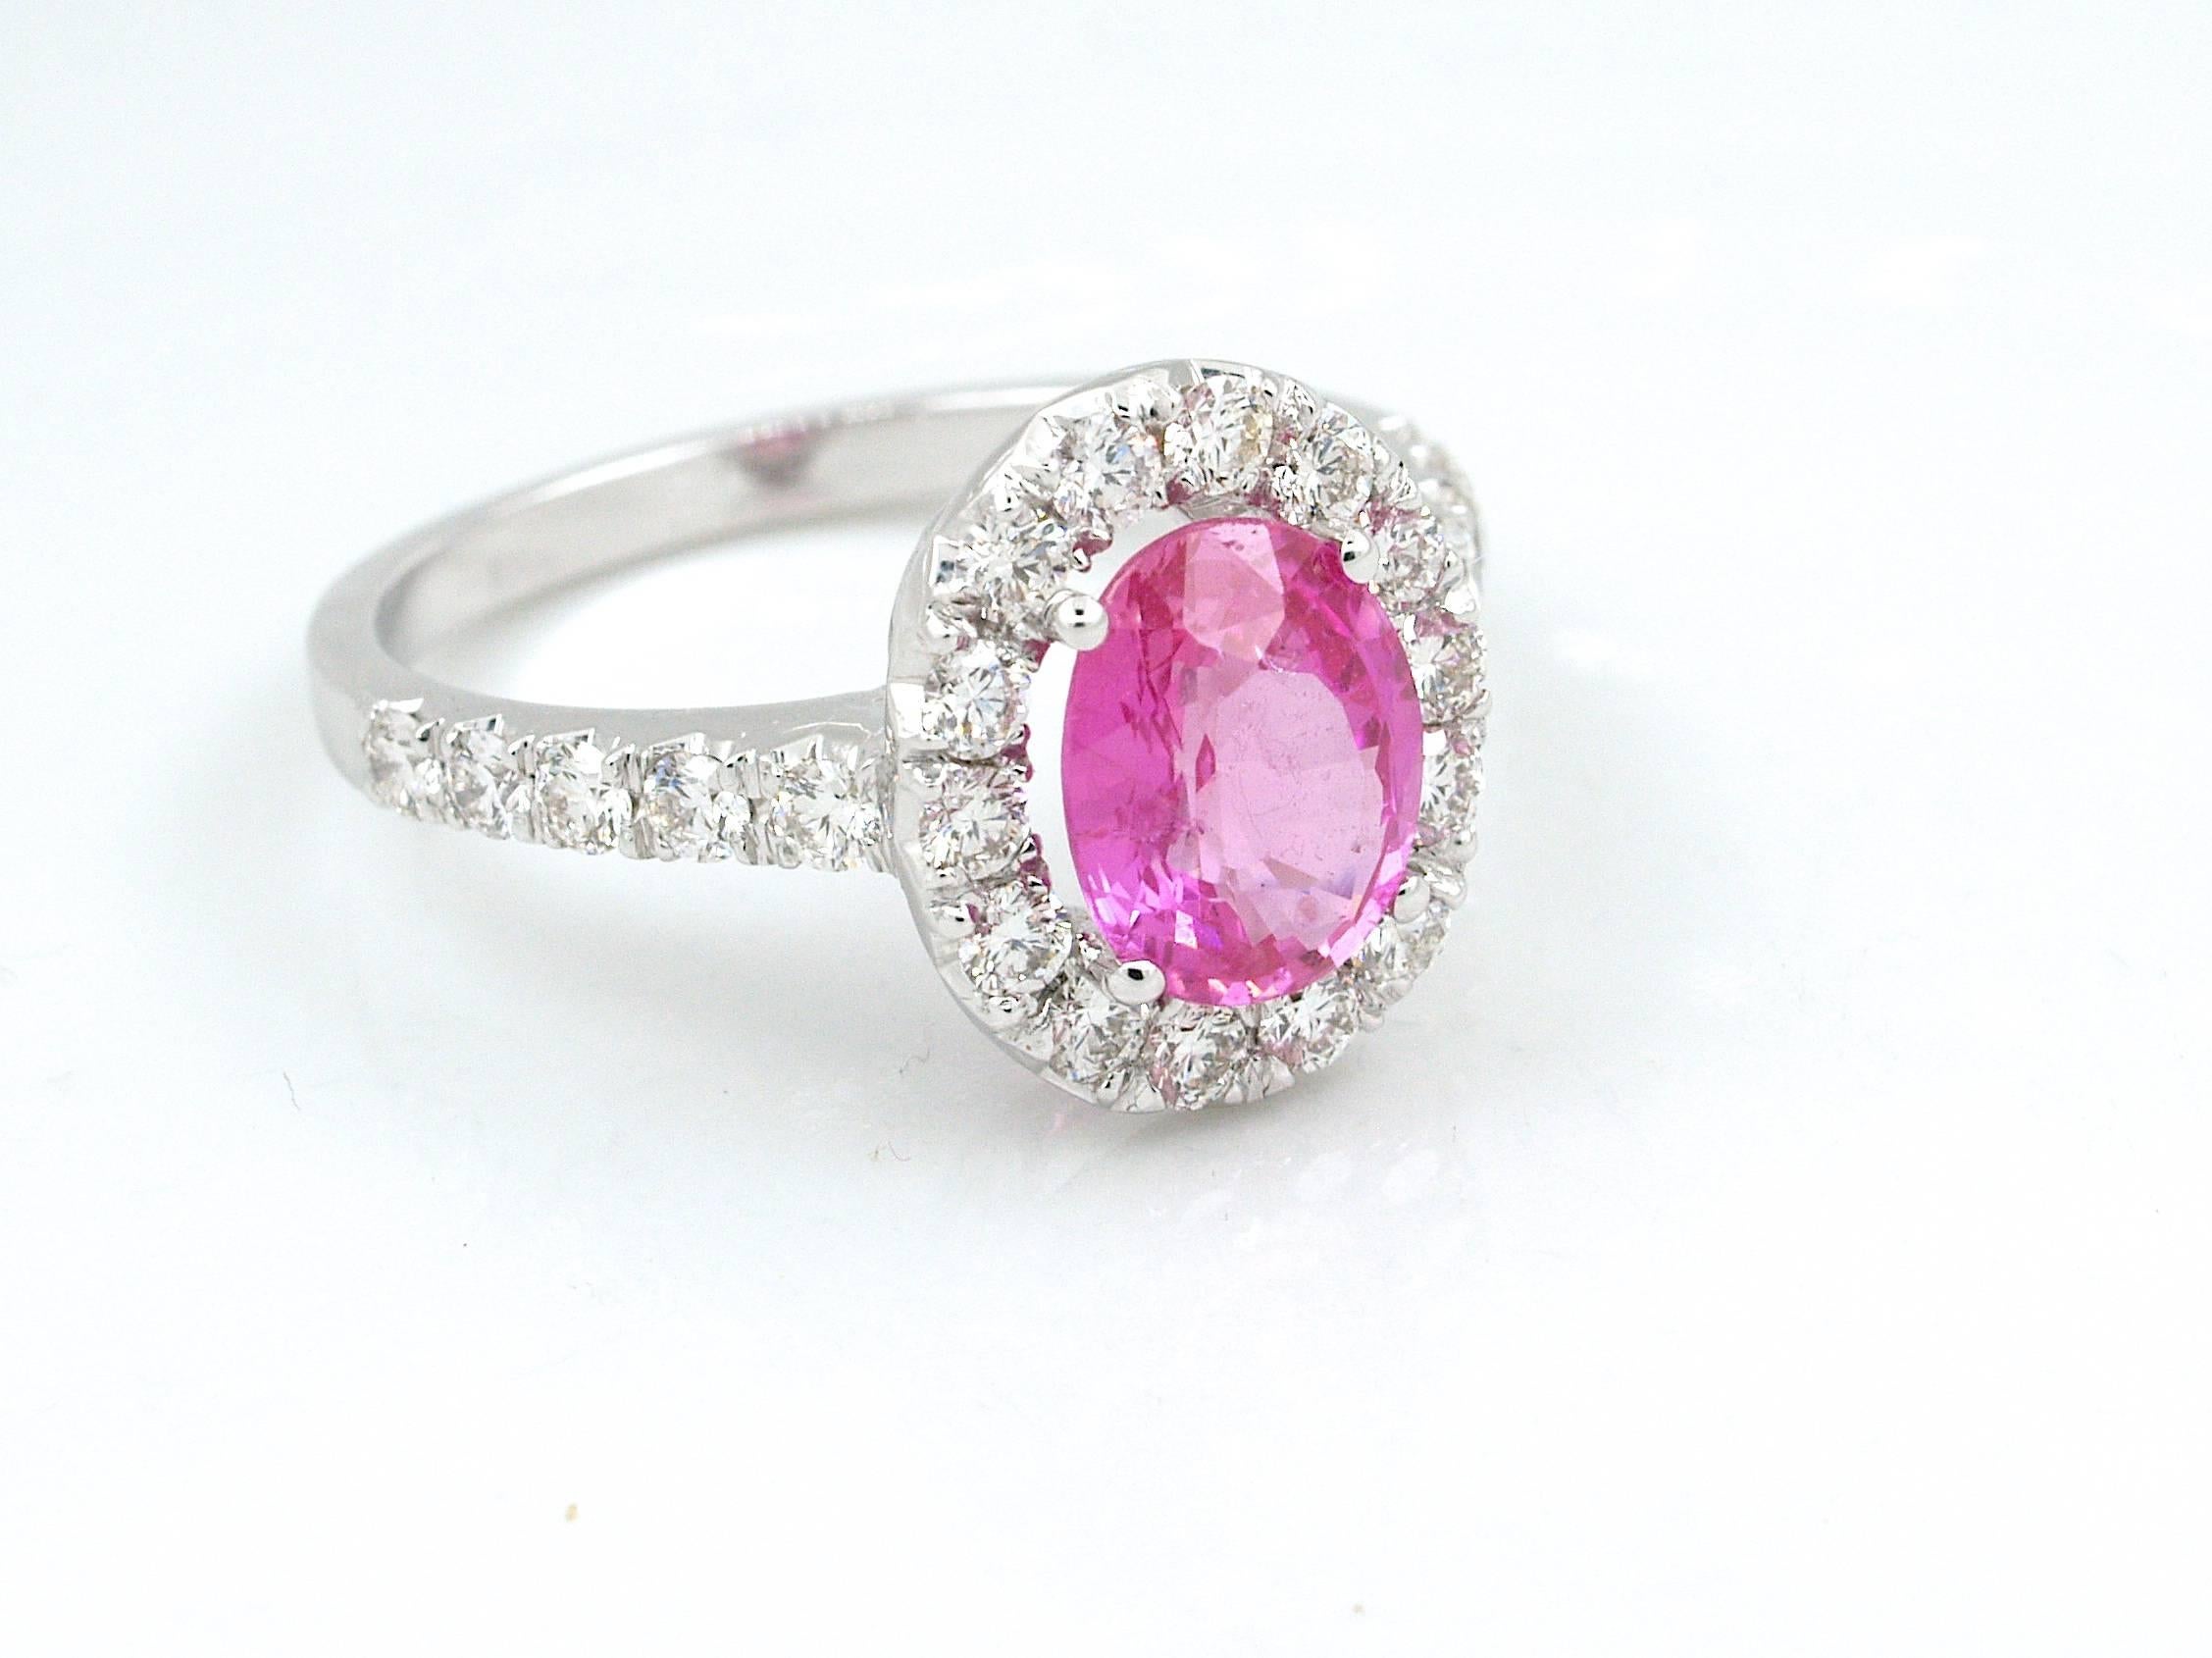 18k yellow gold ring featuring a natural pink sapphire weighting 1.61cts and accented by brillant  cut diamonds weighting  0.67 cts, G-H color, VS clarity.

An IGI Antwerp certificate indicates that the stone is not heated.
Beautiful pink